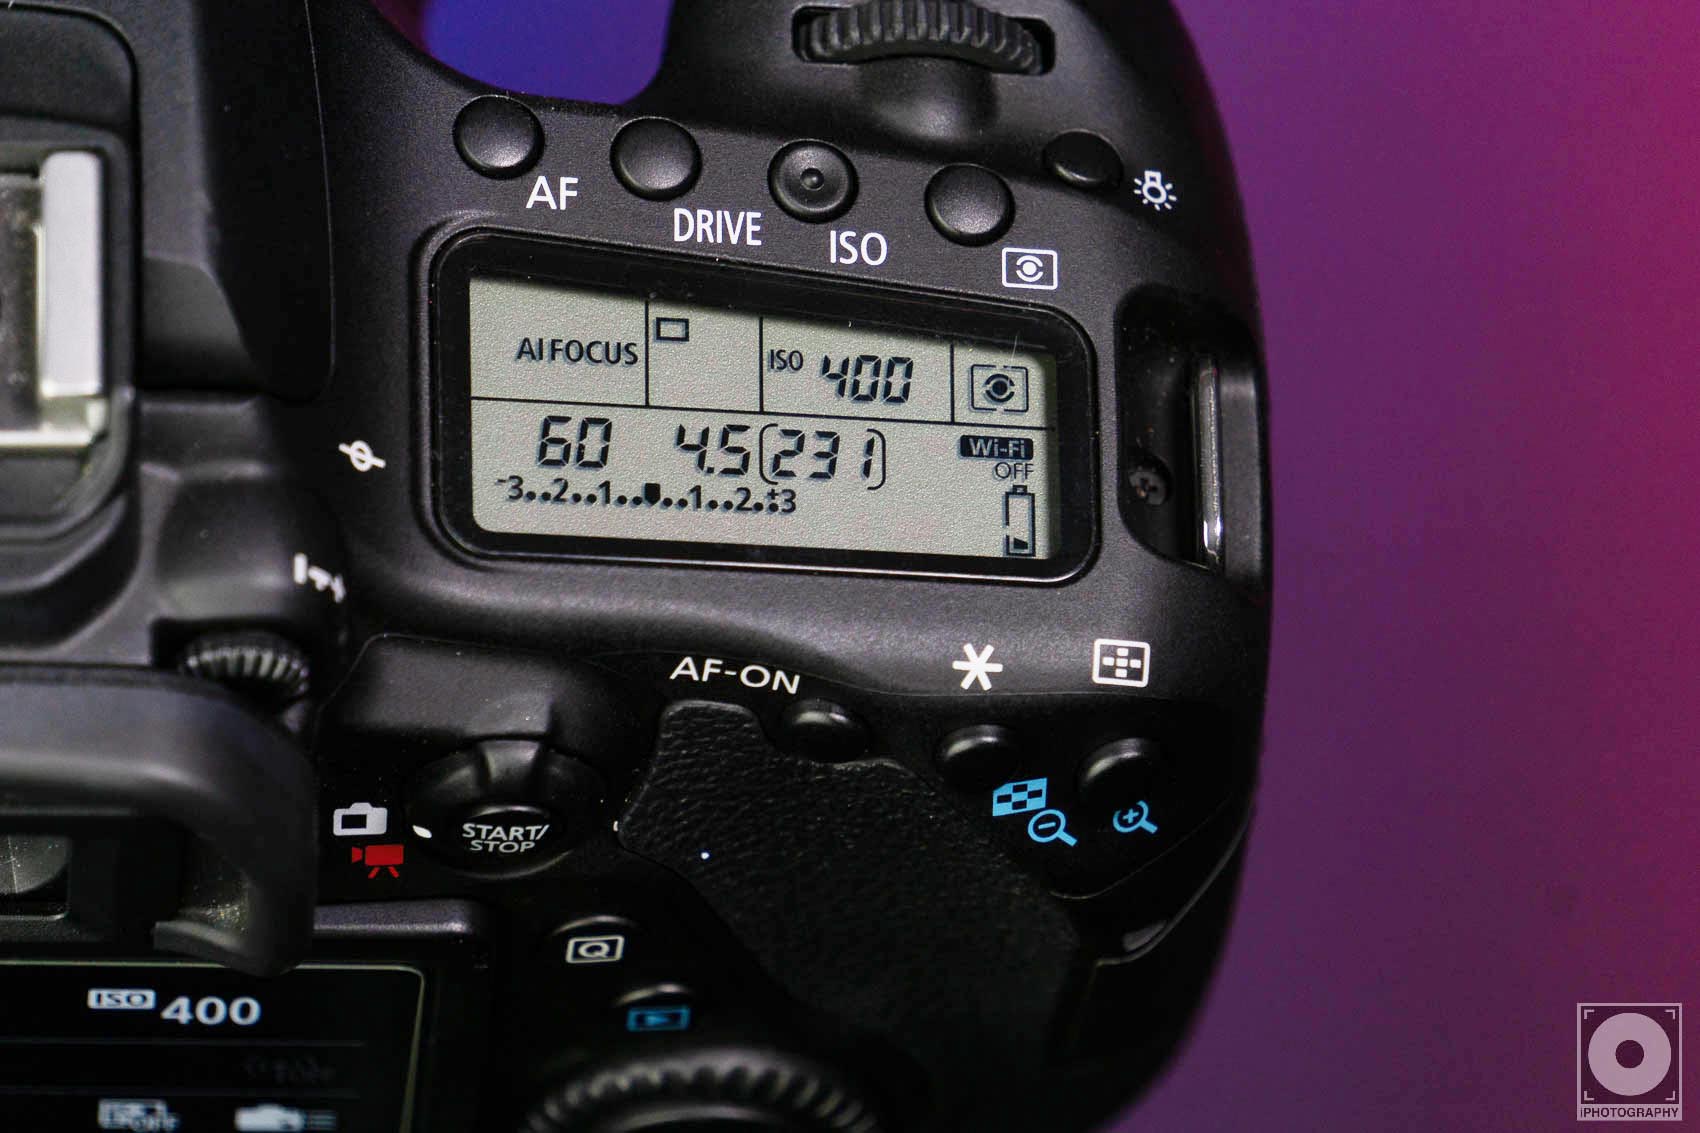 7 Things to Consider When Choosing Your First Canon Camera